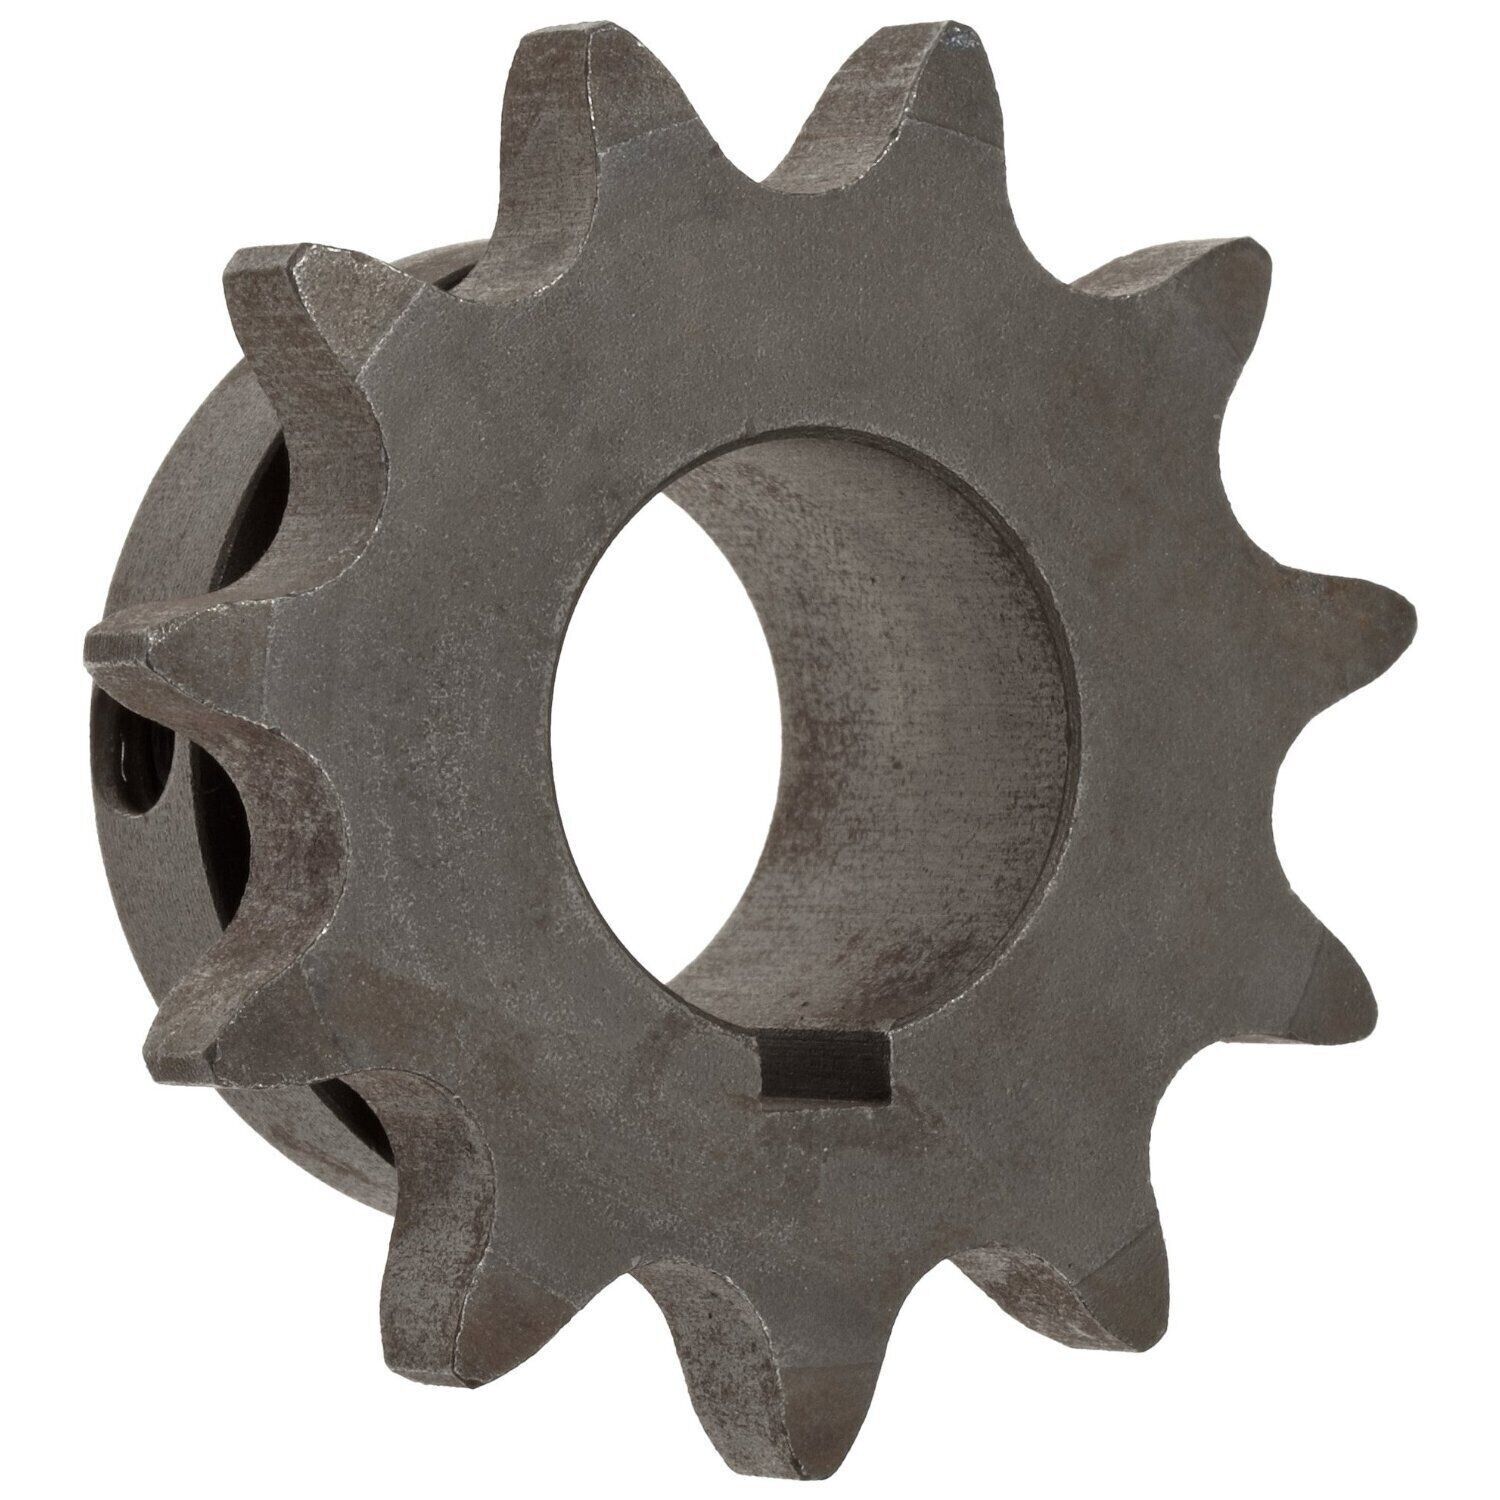 40B09H-5/8" Type B Hub Finish Bore Sprocket for #40 Roller Chain 9 Tooth Aftermarket 40B09H-5/8"